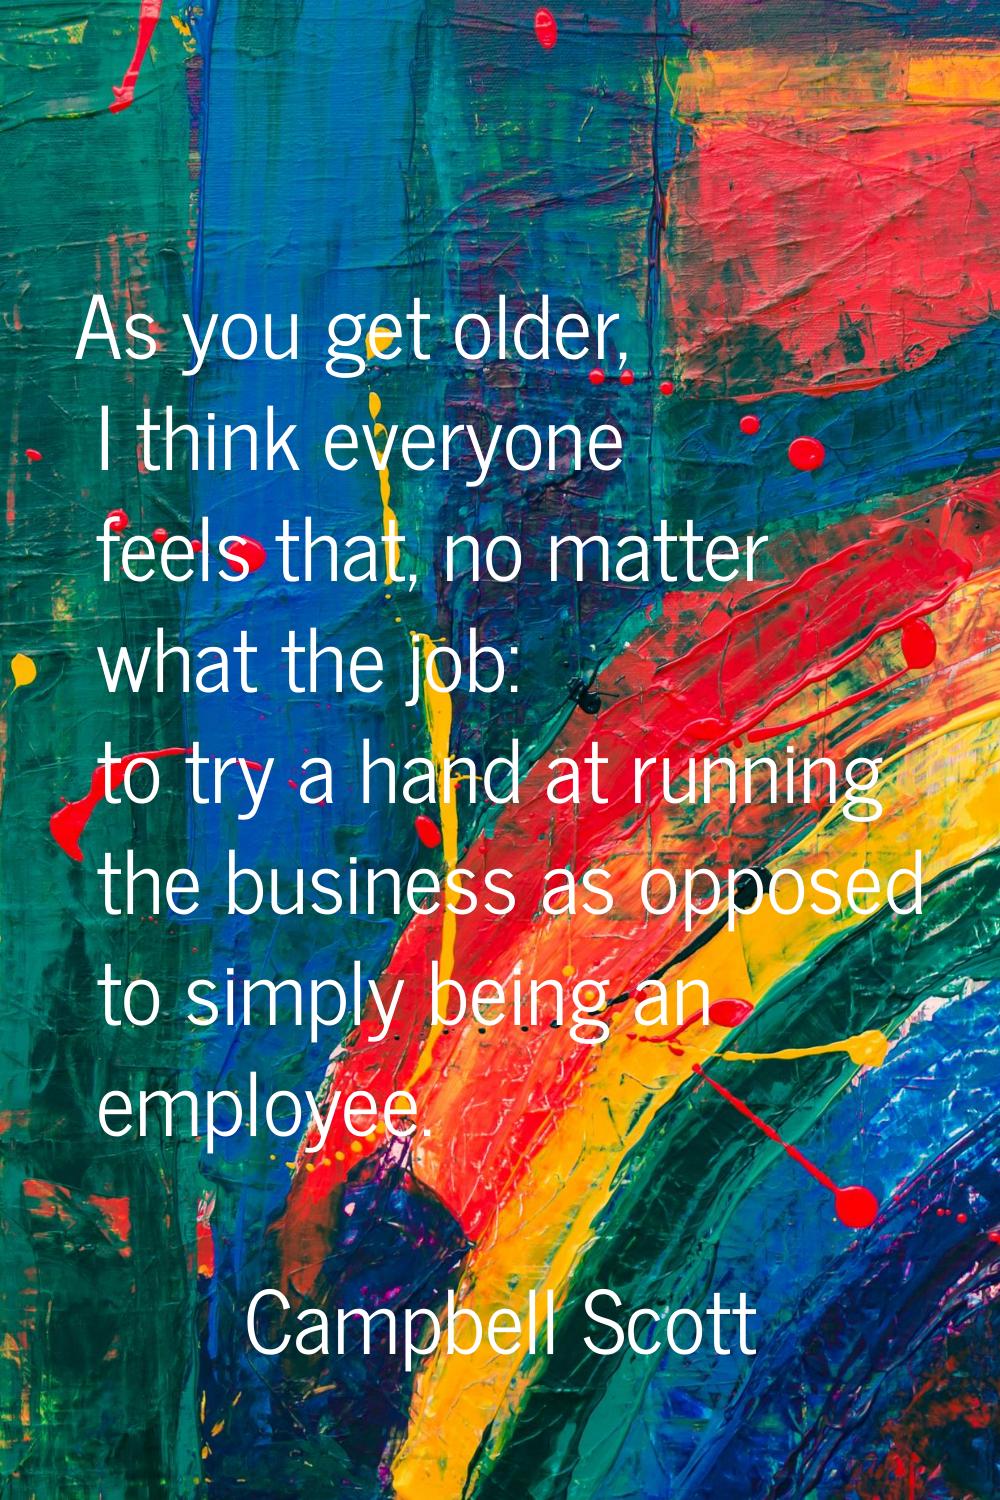 As you get older, I think everyone feels that, no matter what the job: to try a hand at running the